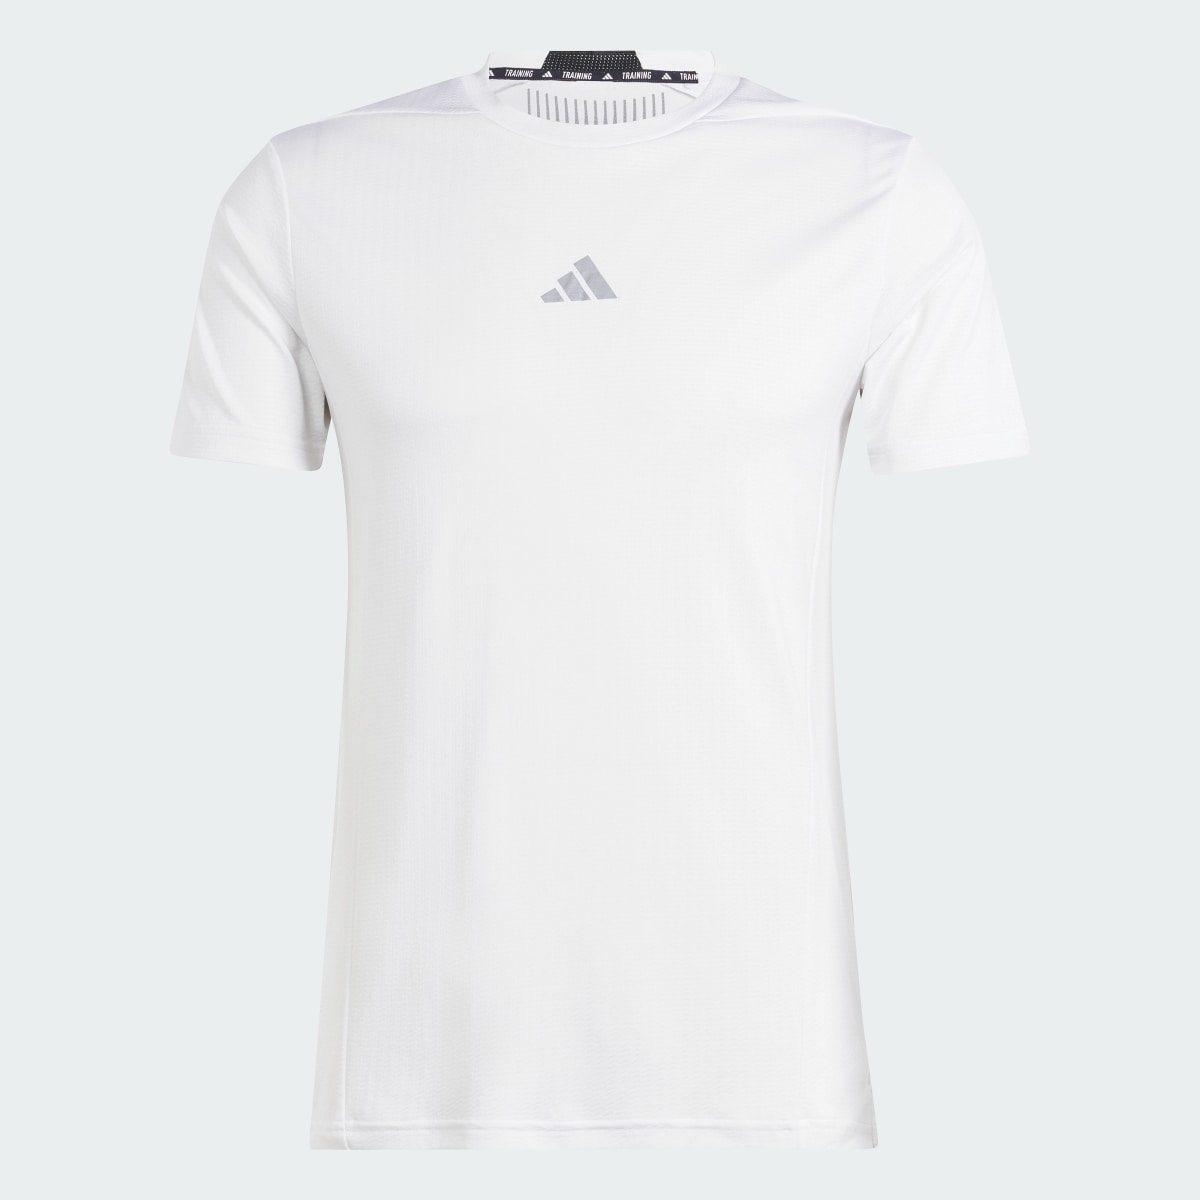 Adidas Designed for Training HIIT Workout HEAT.RDY Tee. 5